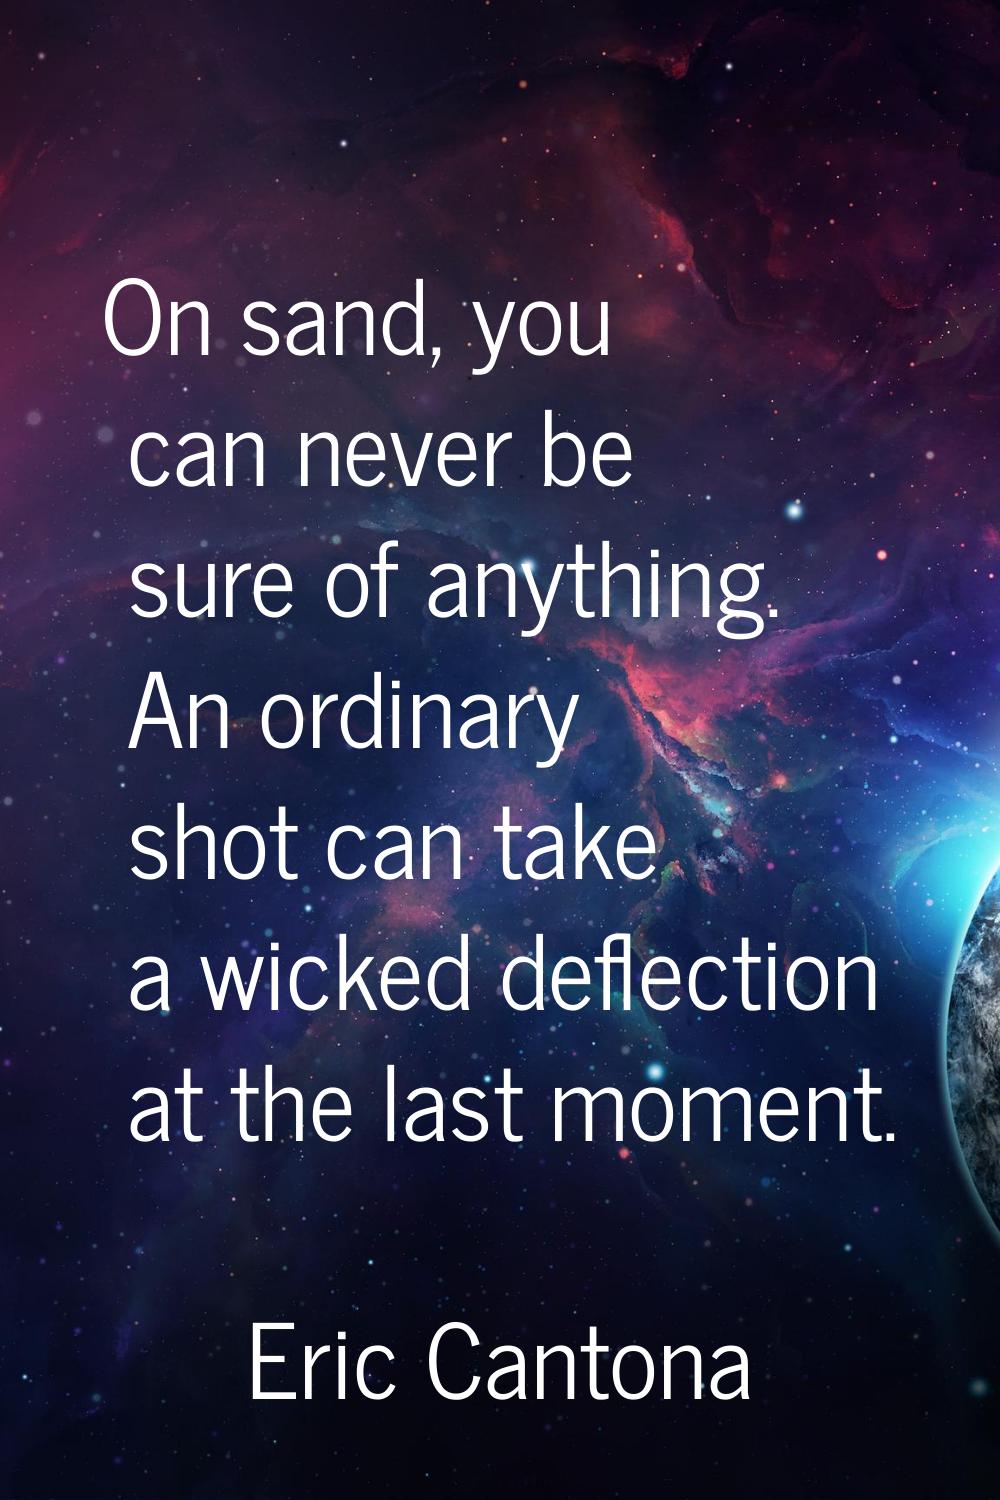 On sand, you can never be sure of anything. An ordinary shot can take a wicked deflection at the la